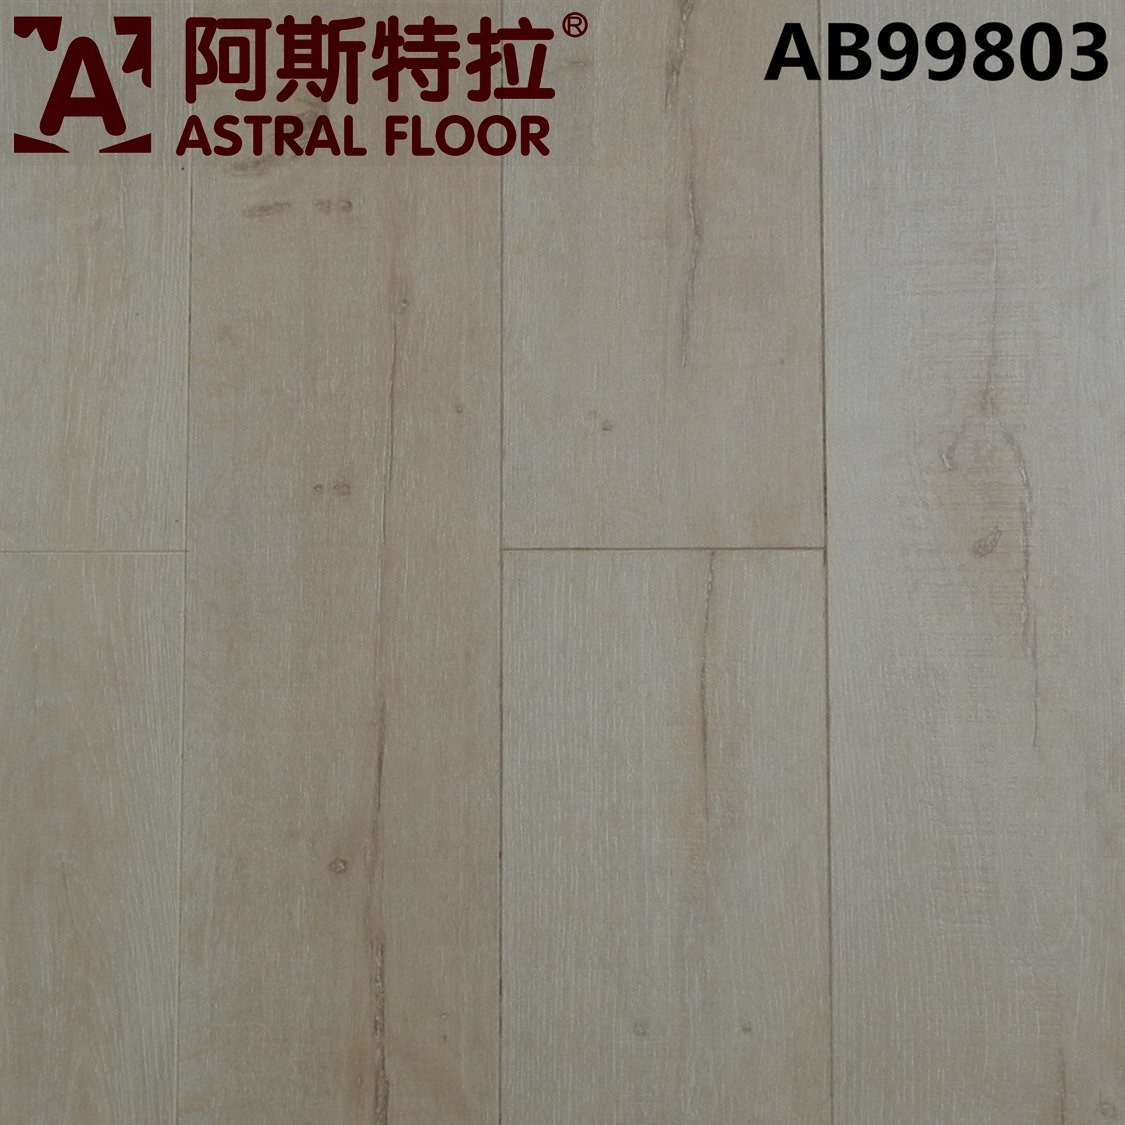 Changzhou 12mm New Product Rotten Wood Grain Surface Laminate Flooring (AB99803)